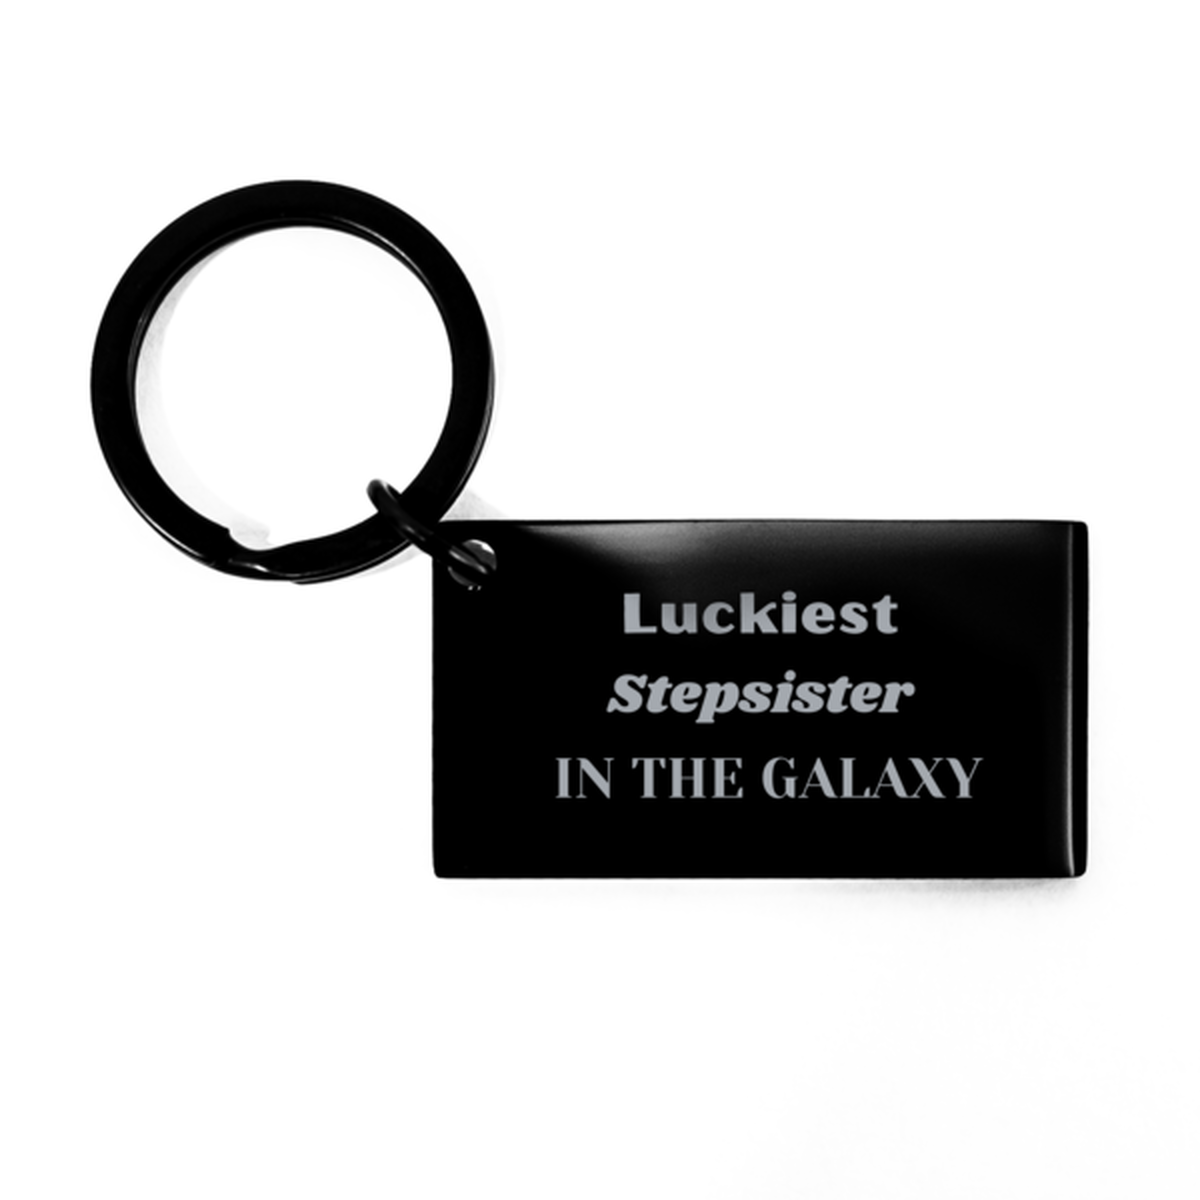 Luckiest Stepsister in the Galaxy, To My Stepsister Engraved Gifts, Christmas Stepsister Keychain Gifts, X-mas Birthday Unique Gifts For Stepsister Men Women